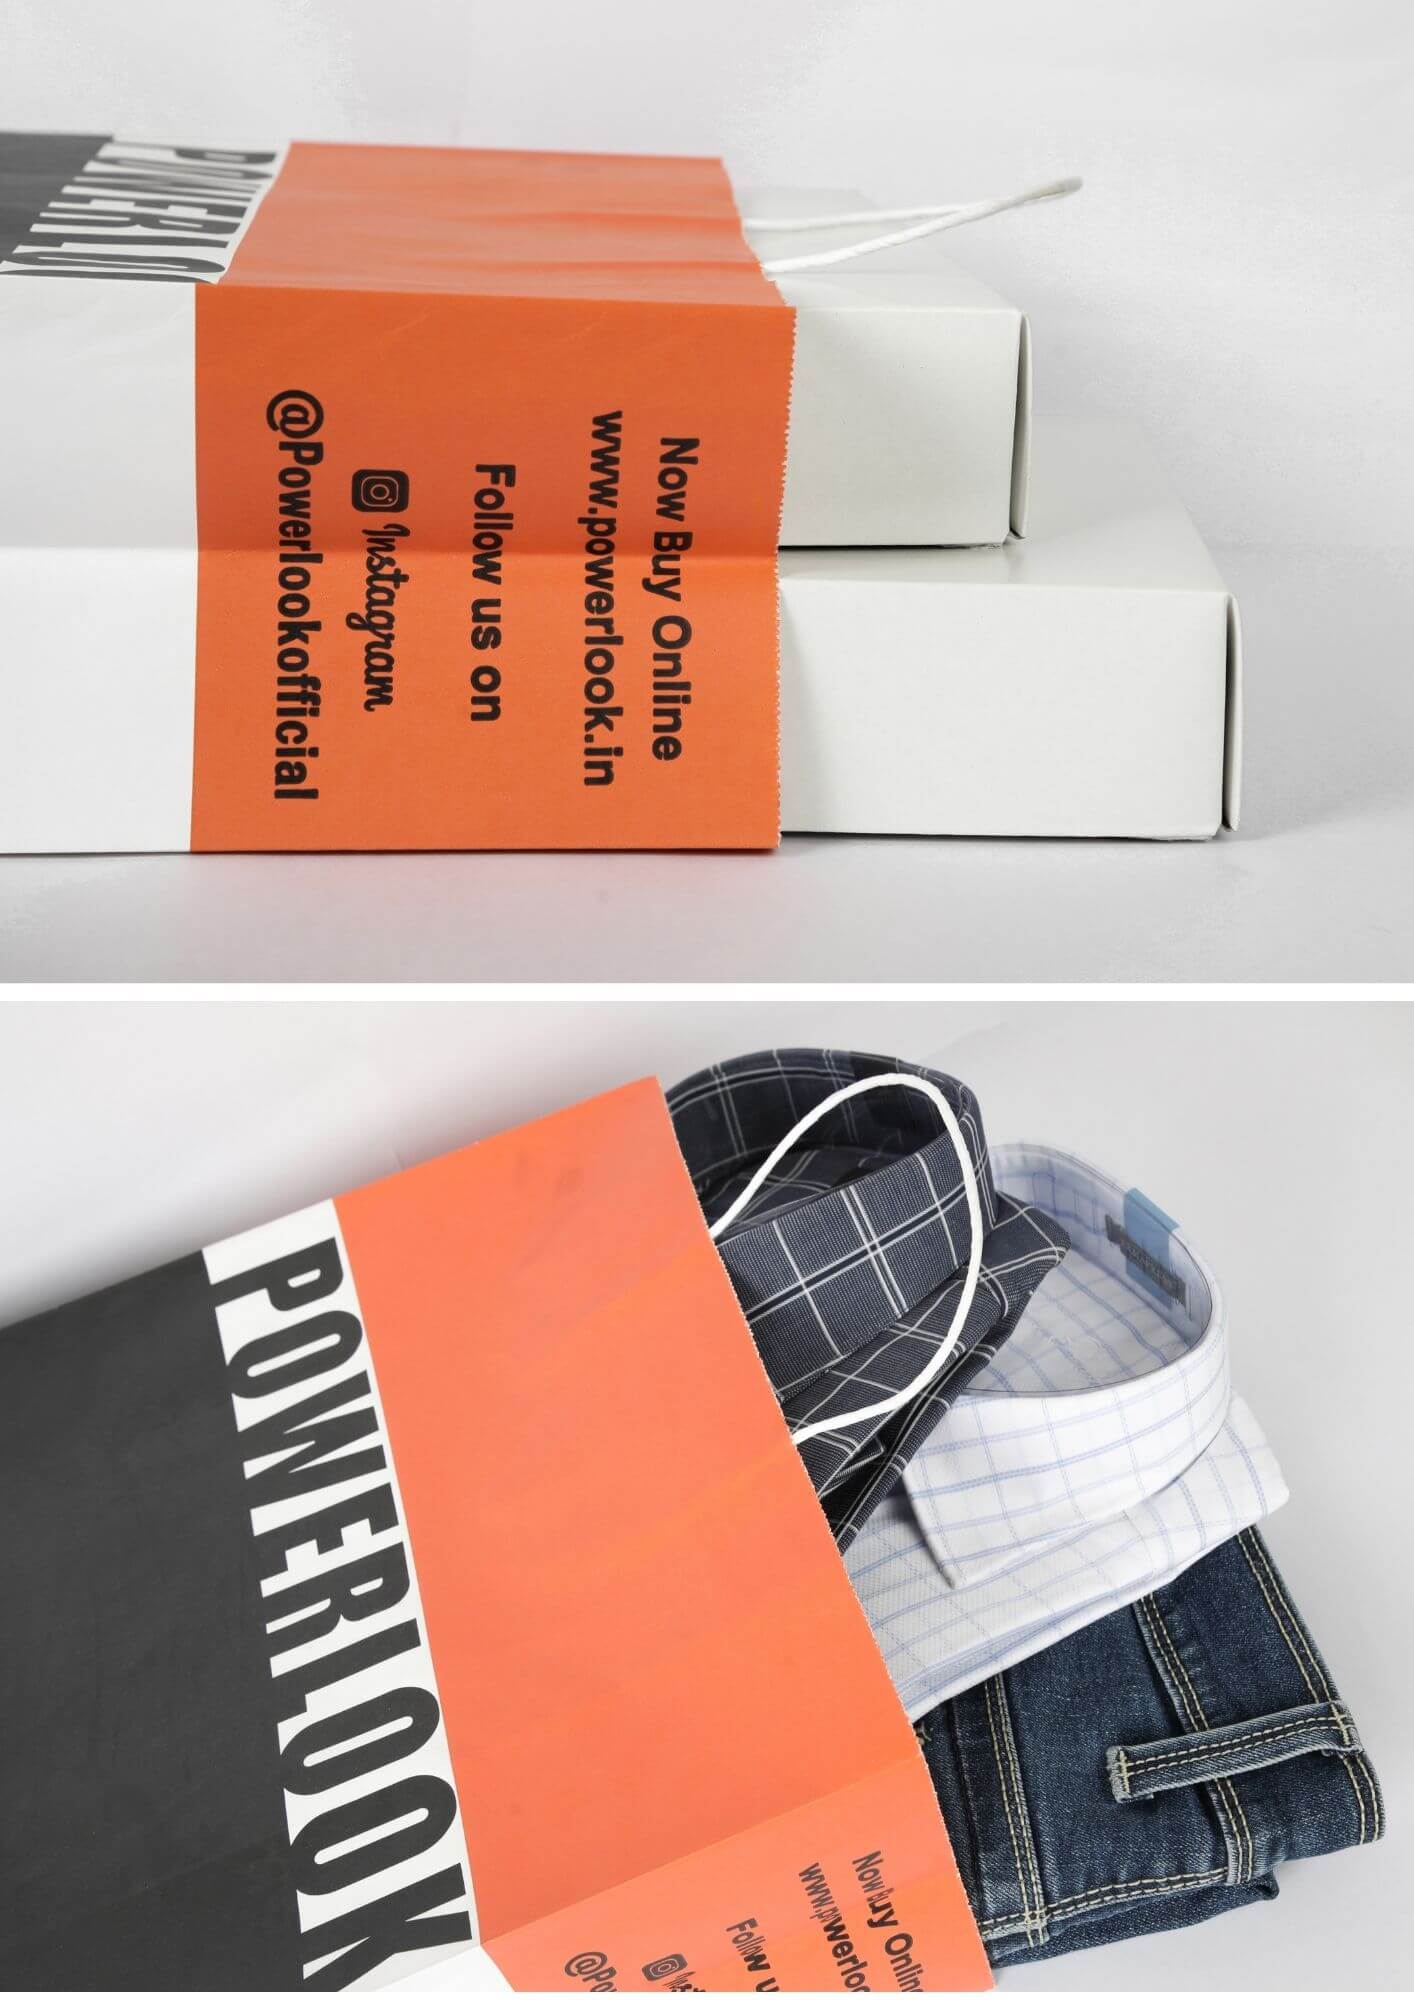 A bleach kraft paper bag printed by max packaging for powerlook holding jeans, shirts & white boxes